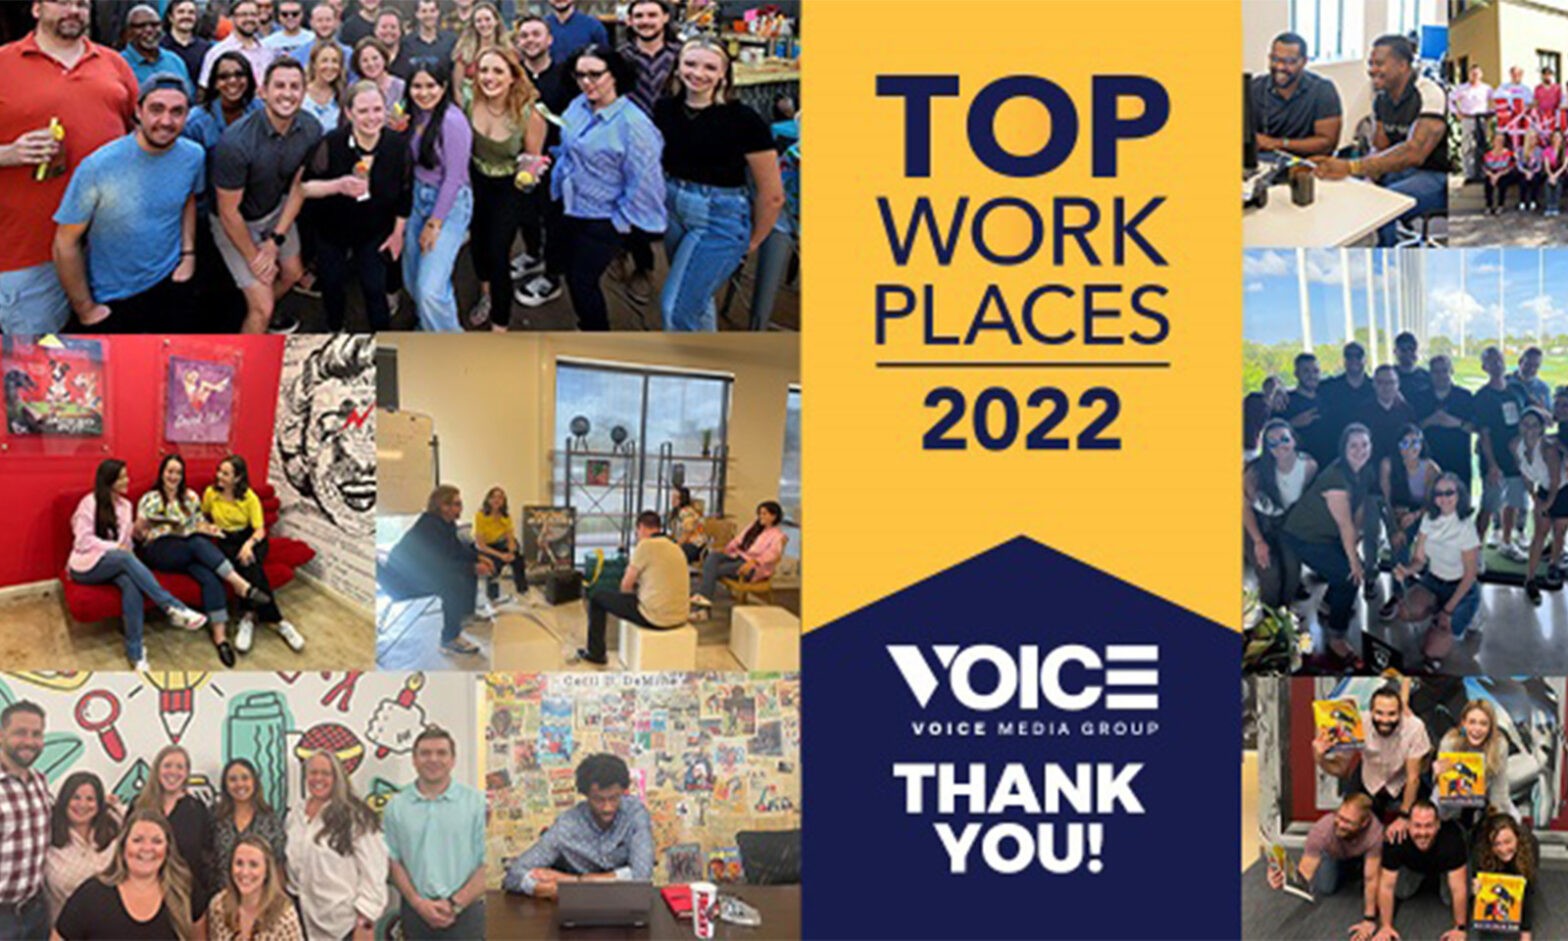 Featured image for post: V DIGITAL SERVICES’ PARENT COMPANY NAMED A TOP EMPLOYER FOR 2022